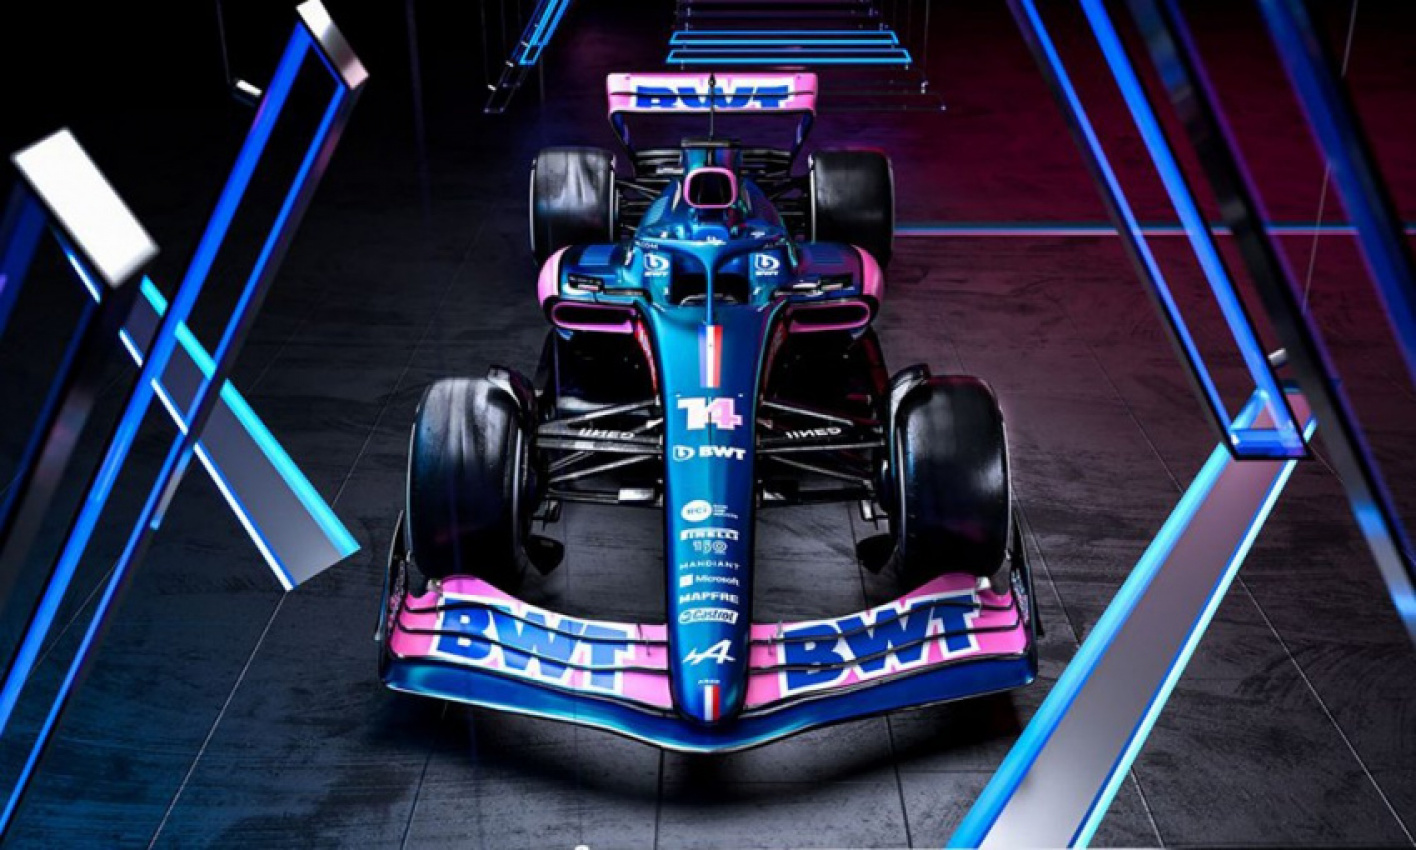 acer, autos, cars, reviews, check out alpine f1’s blue-and-pink racer for the 2022 season